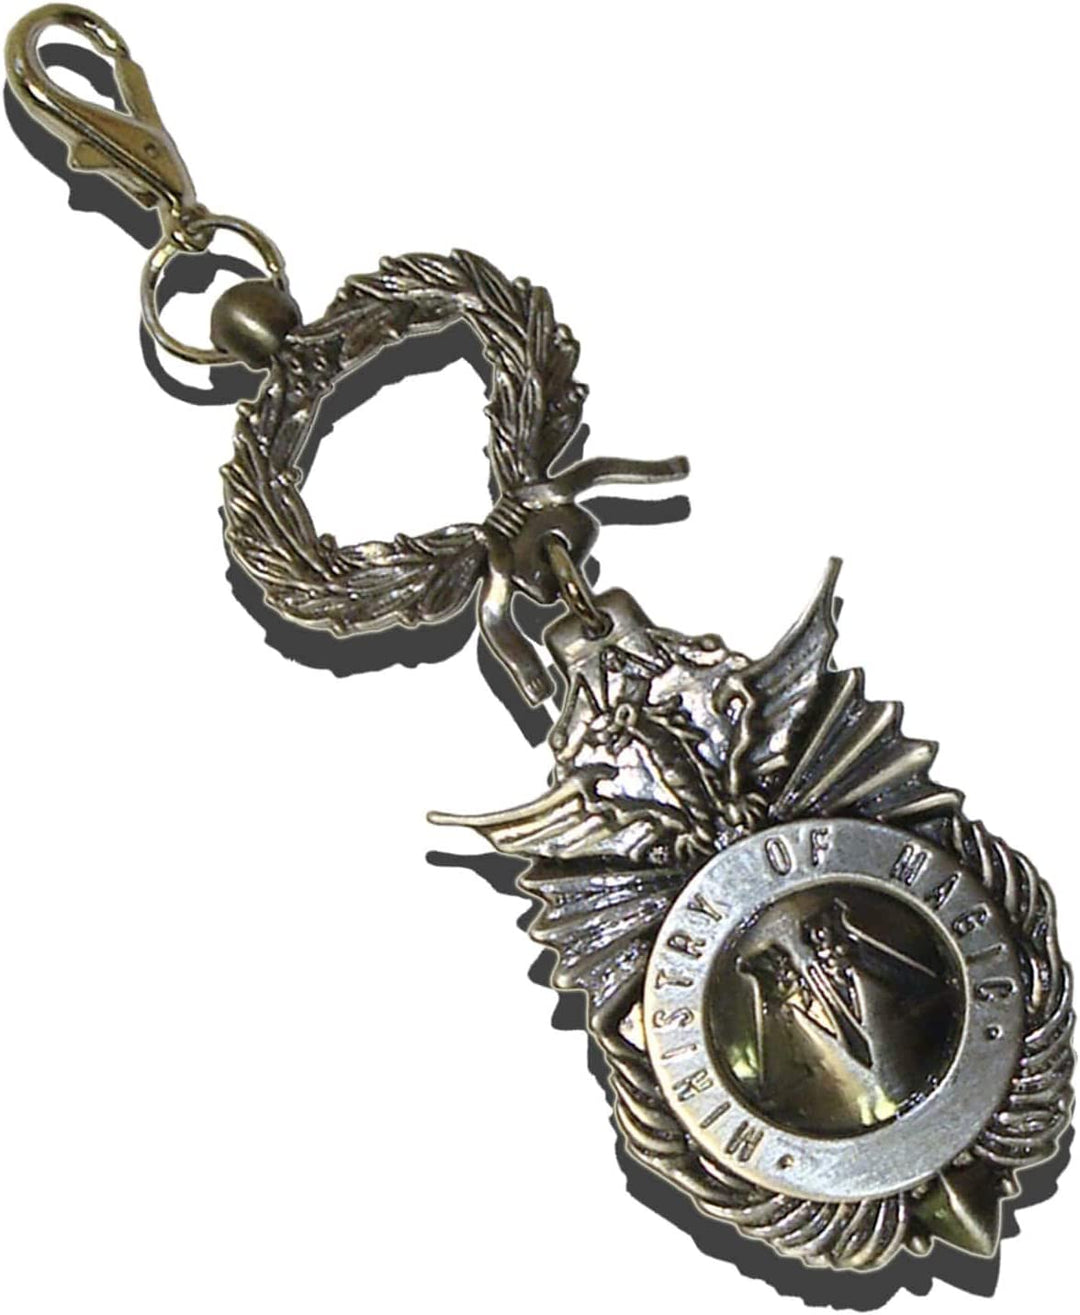 The Noble Collection Harry Potter Ministry of Magic Keychain - 2in (4.5cm) Ministry of Magic Insignia - Harry Potter Film Set Movie Props Gifts Merchandise